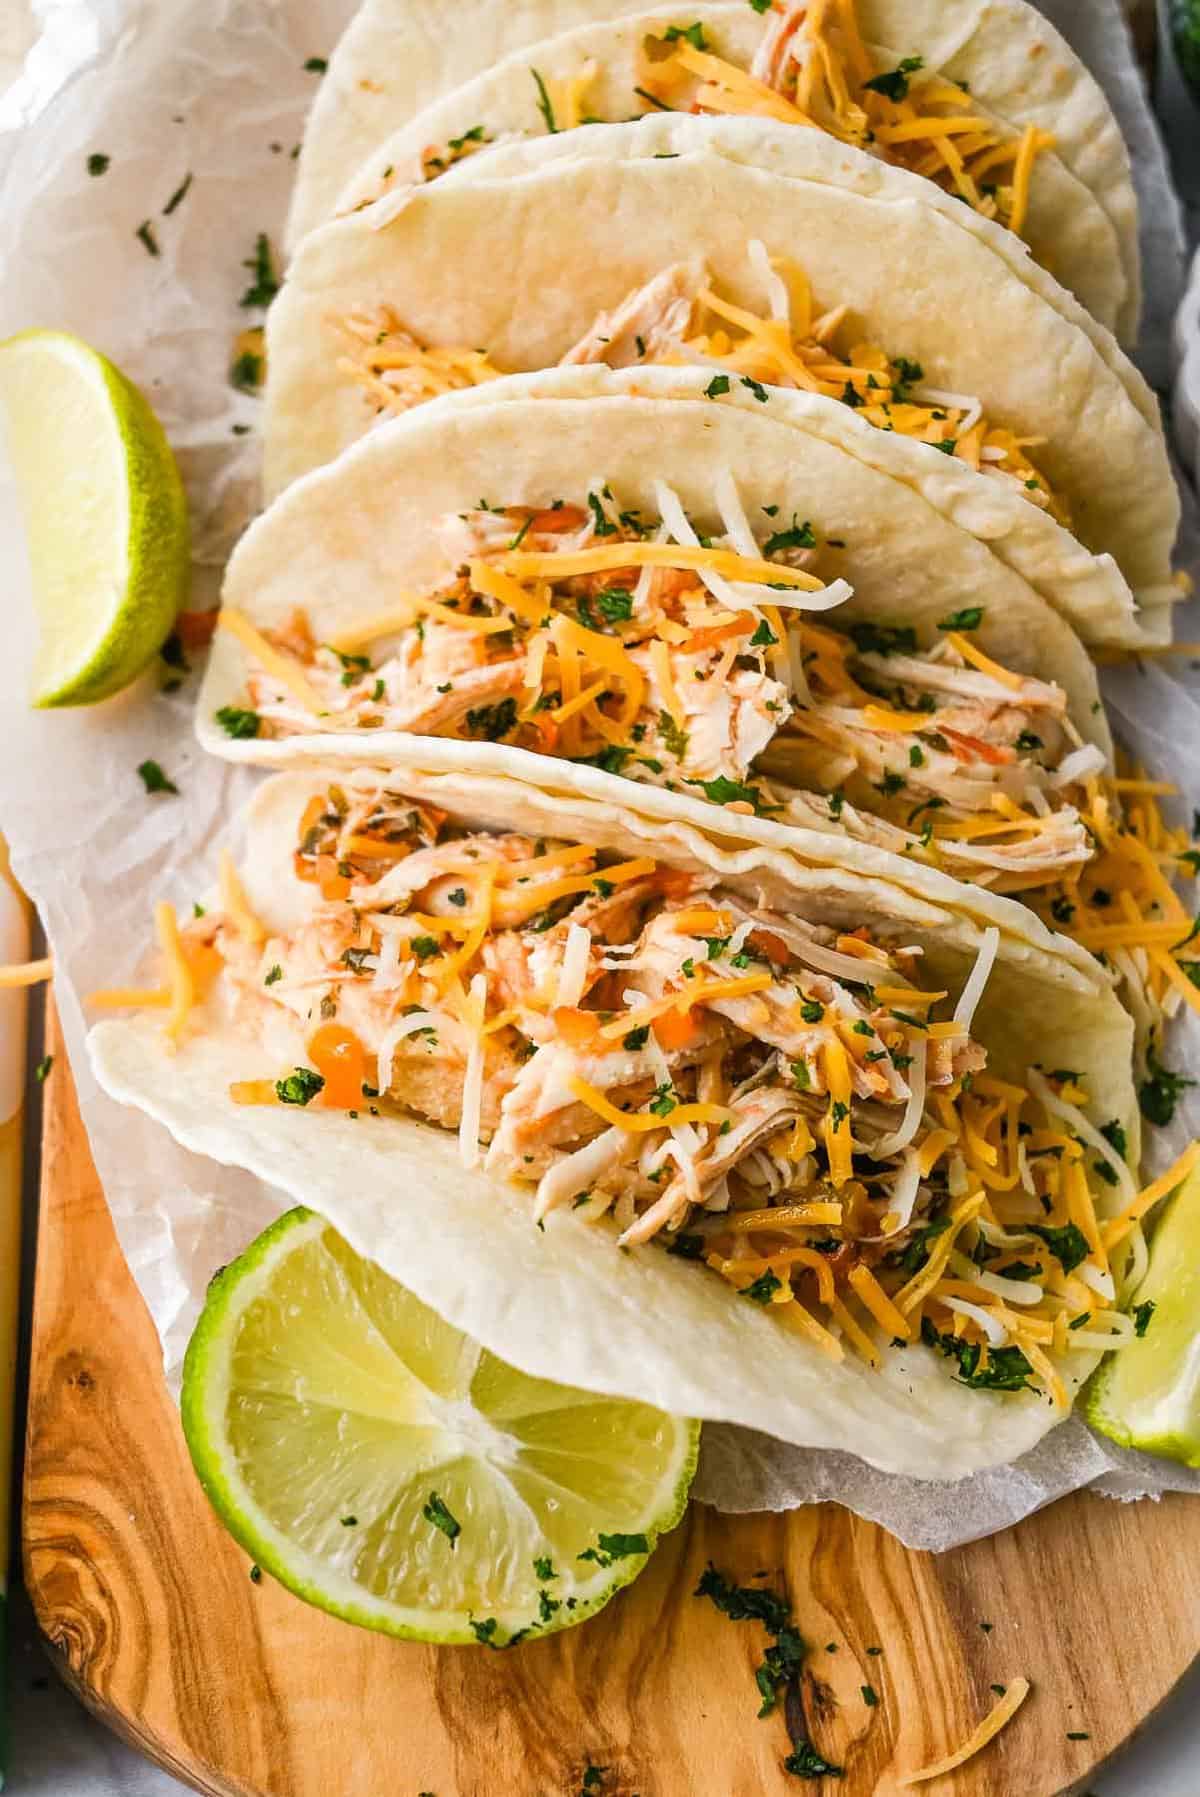 chicken tacos lined up on a wooden board with lime